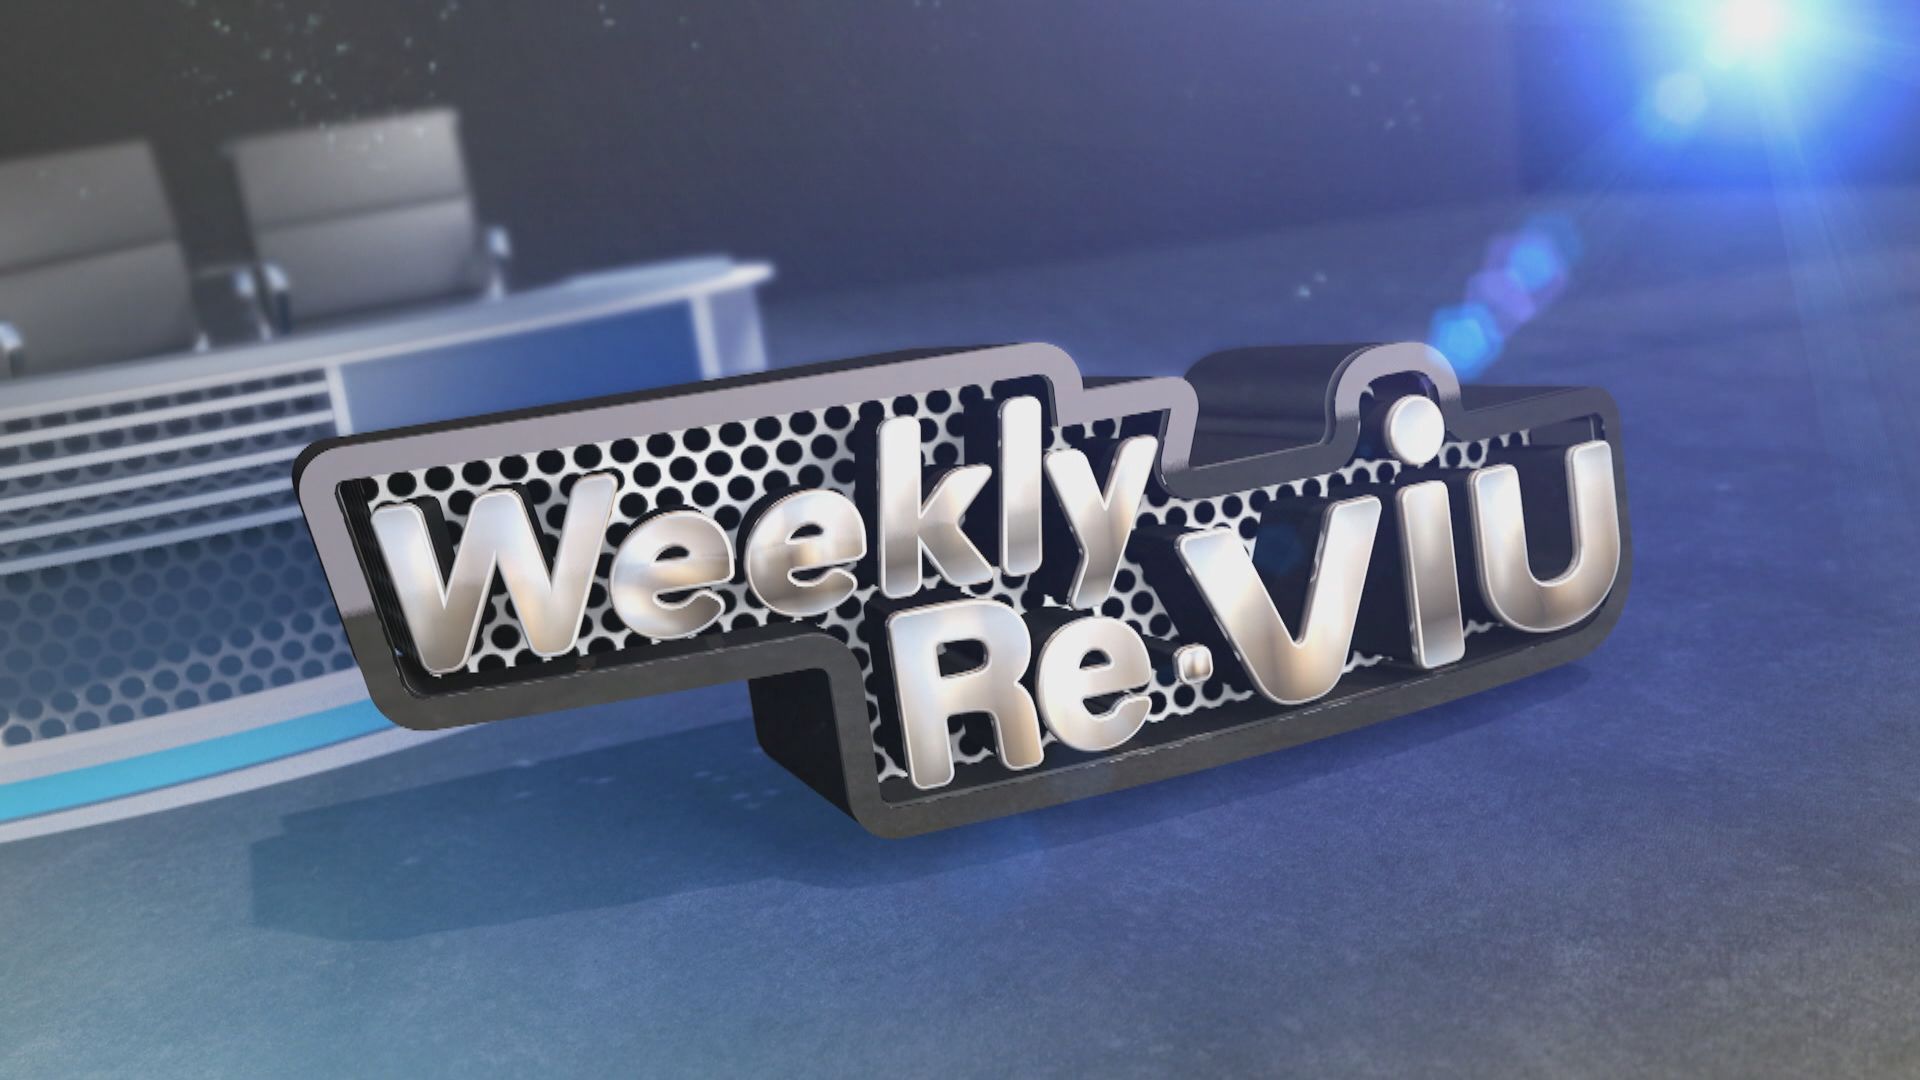 Weekly ReViu | Part Two - Story Roundup (1.10.2022)